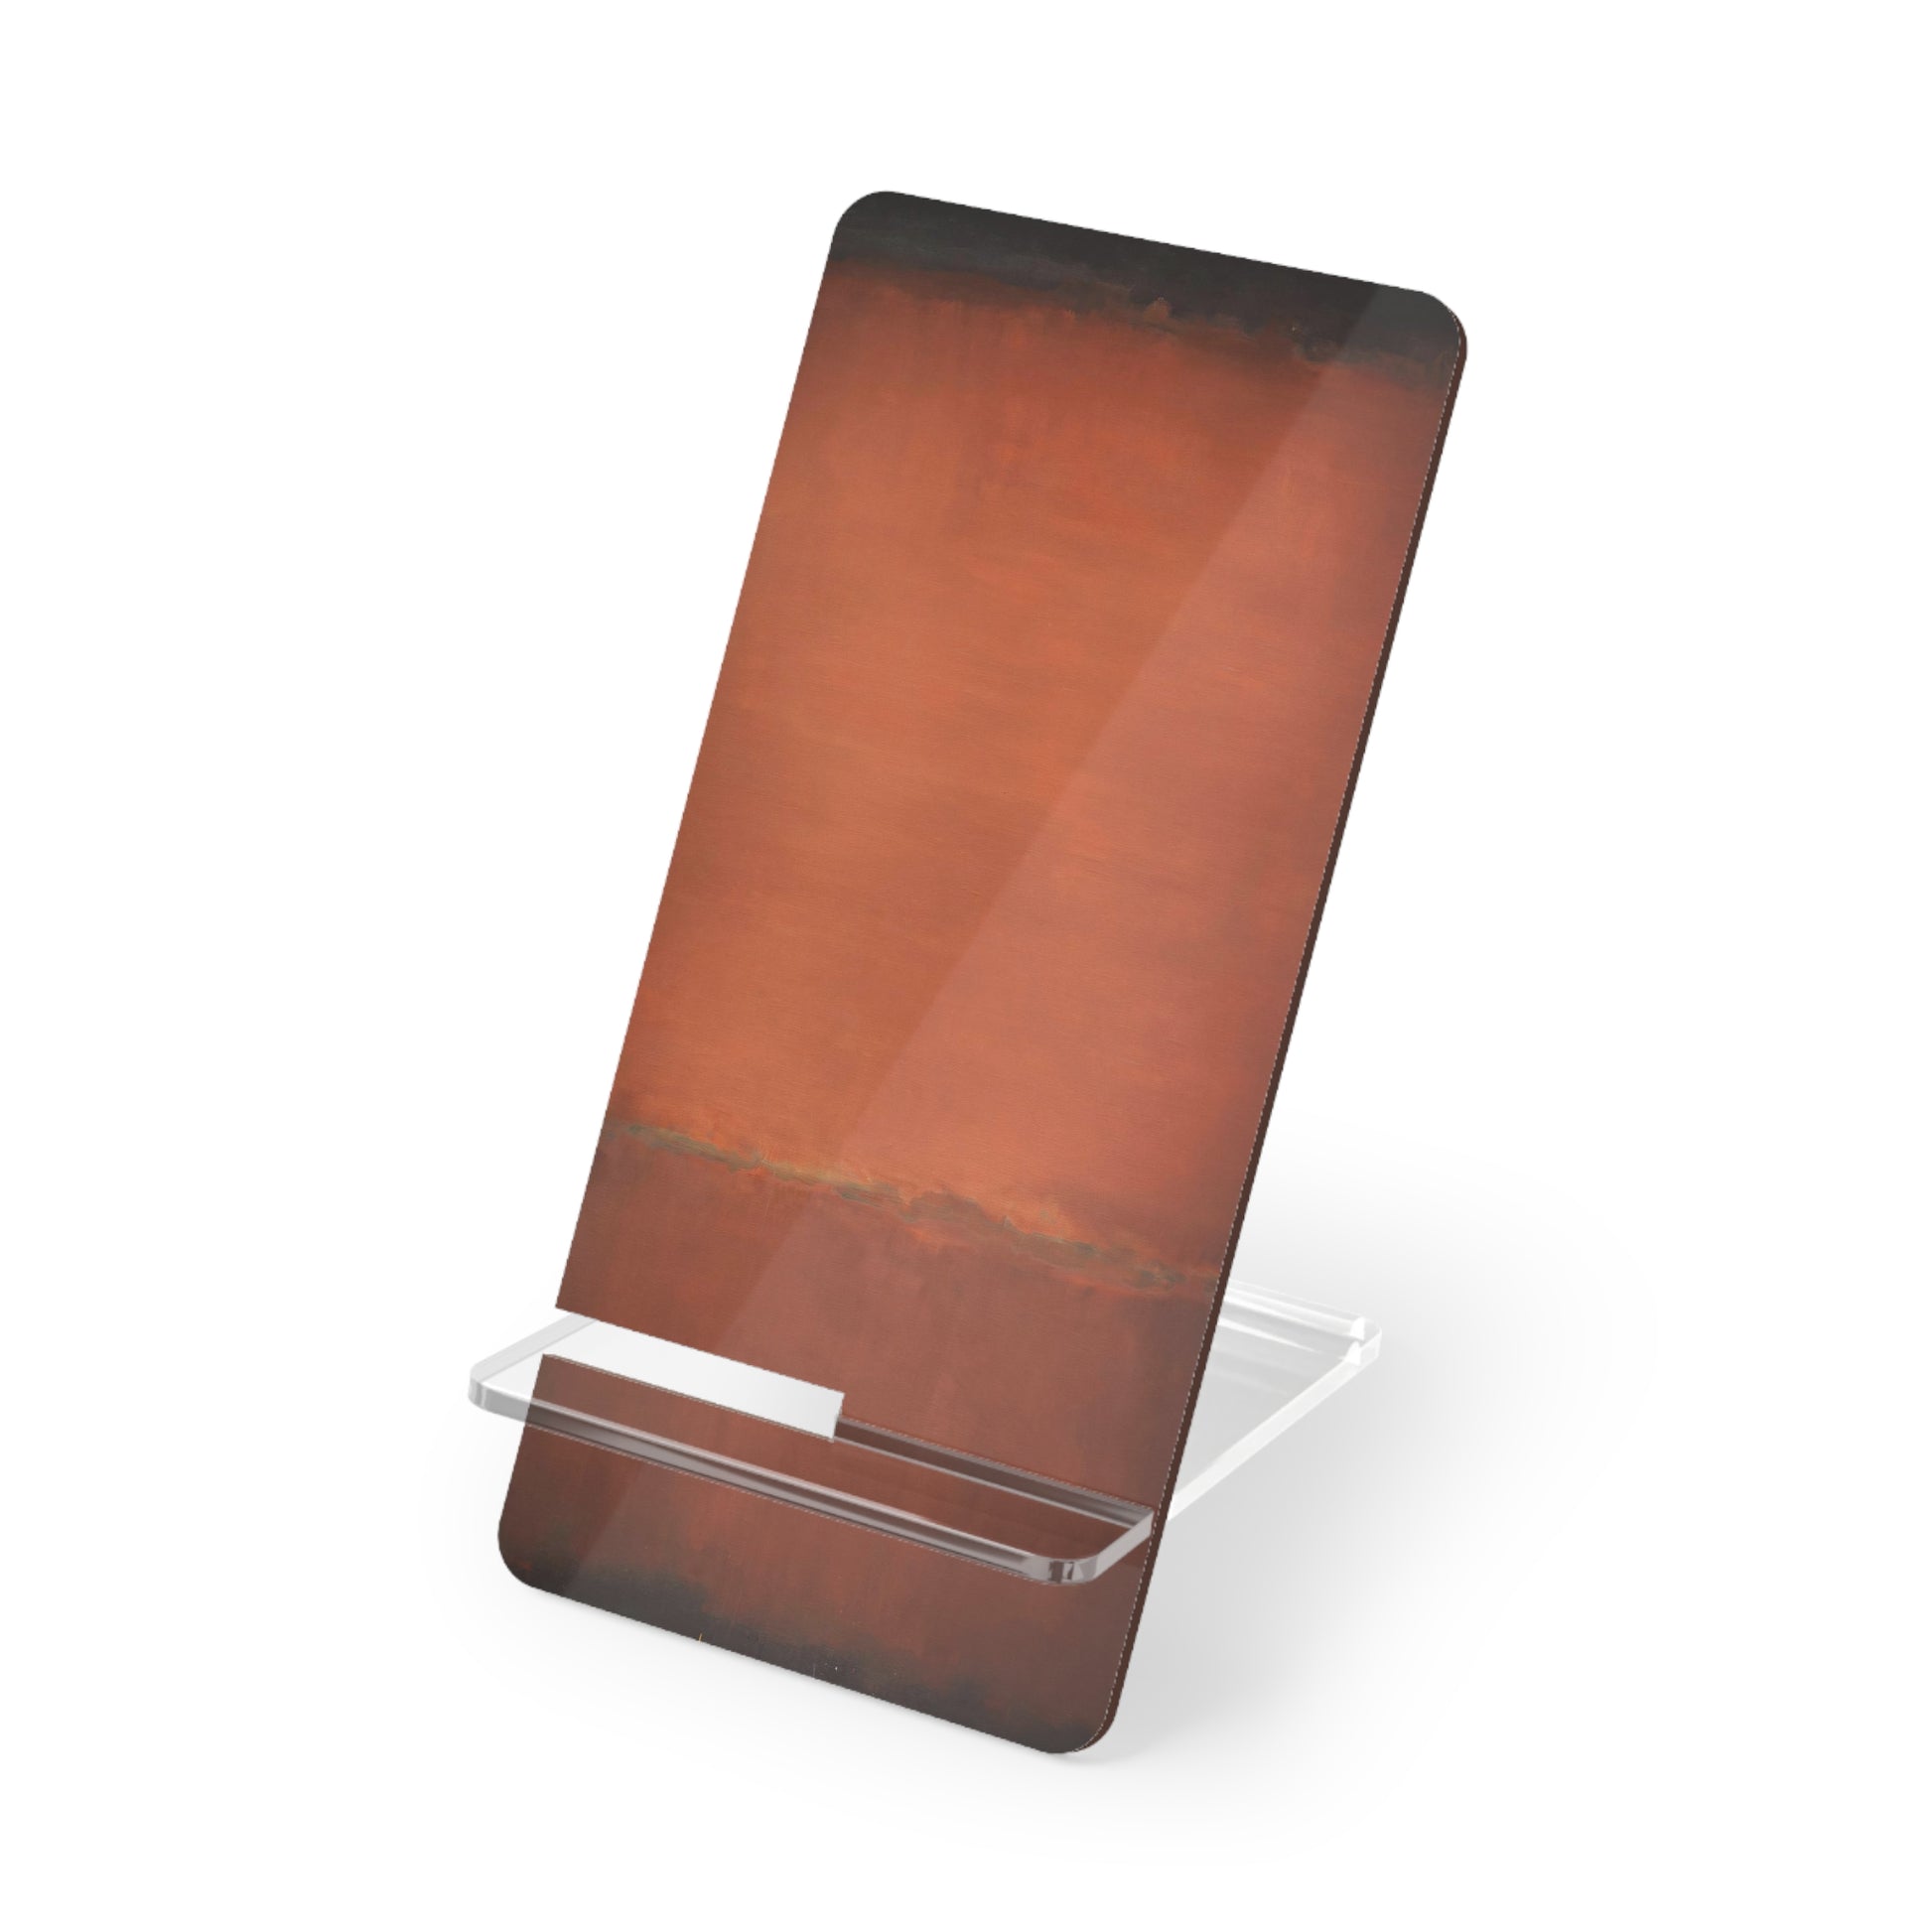 MARK ROTHKO - ABSTRACT ART - MOBILE STAND FOR SMARTPHONES